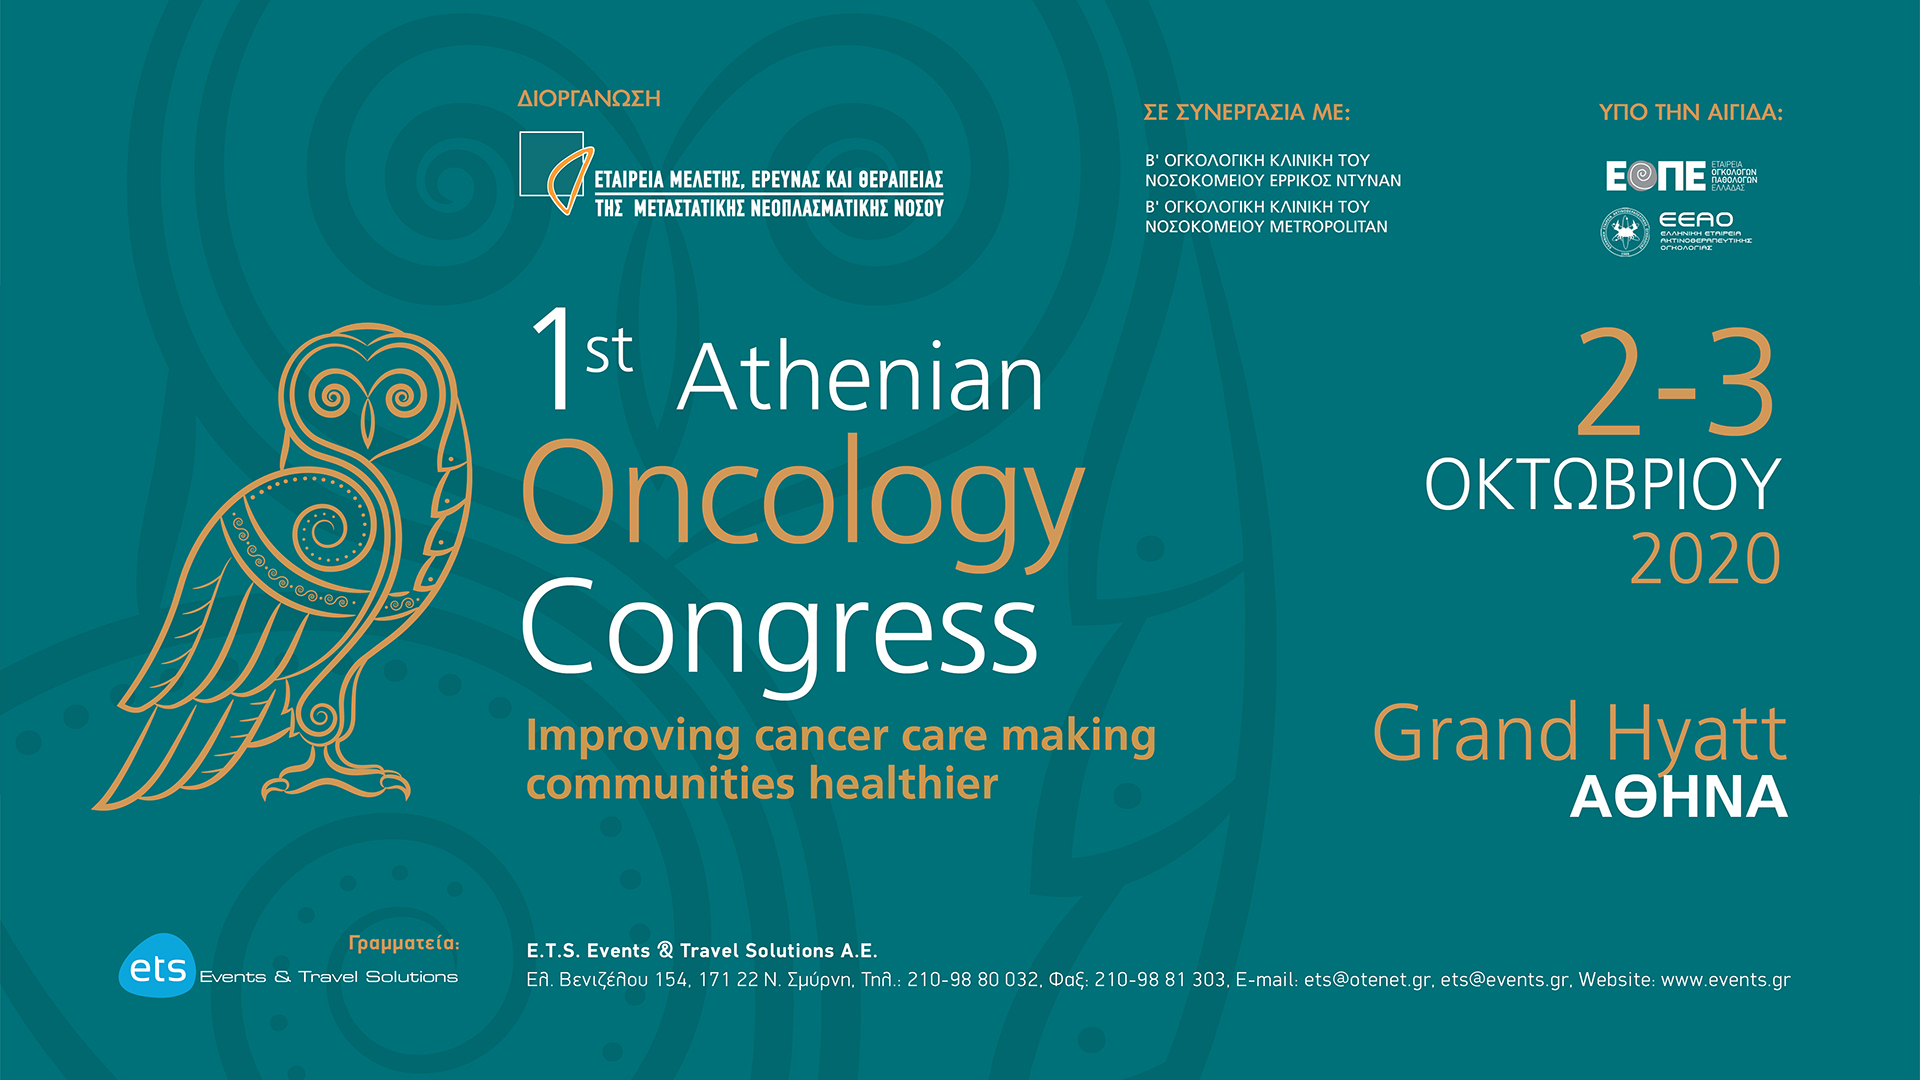 1st Athenian Oncology Congress “Improving cancer care making communities healthier”